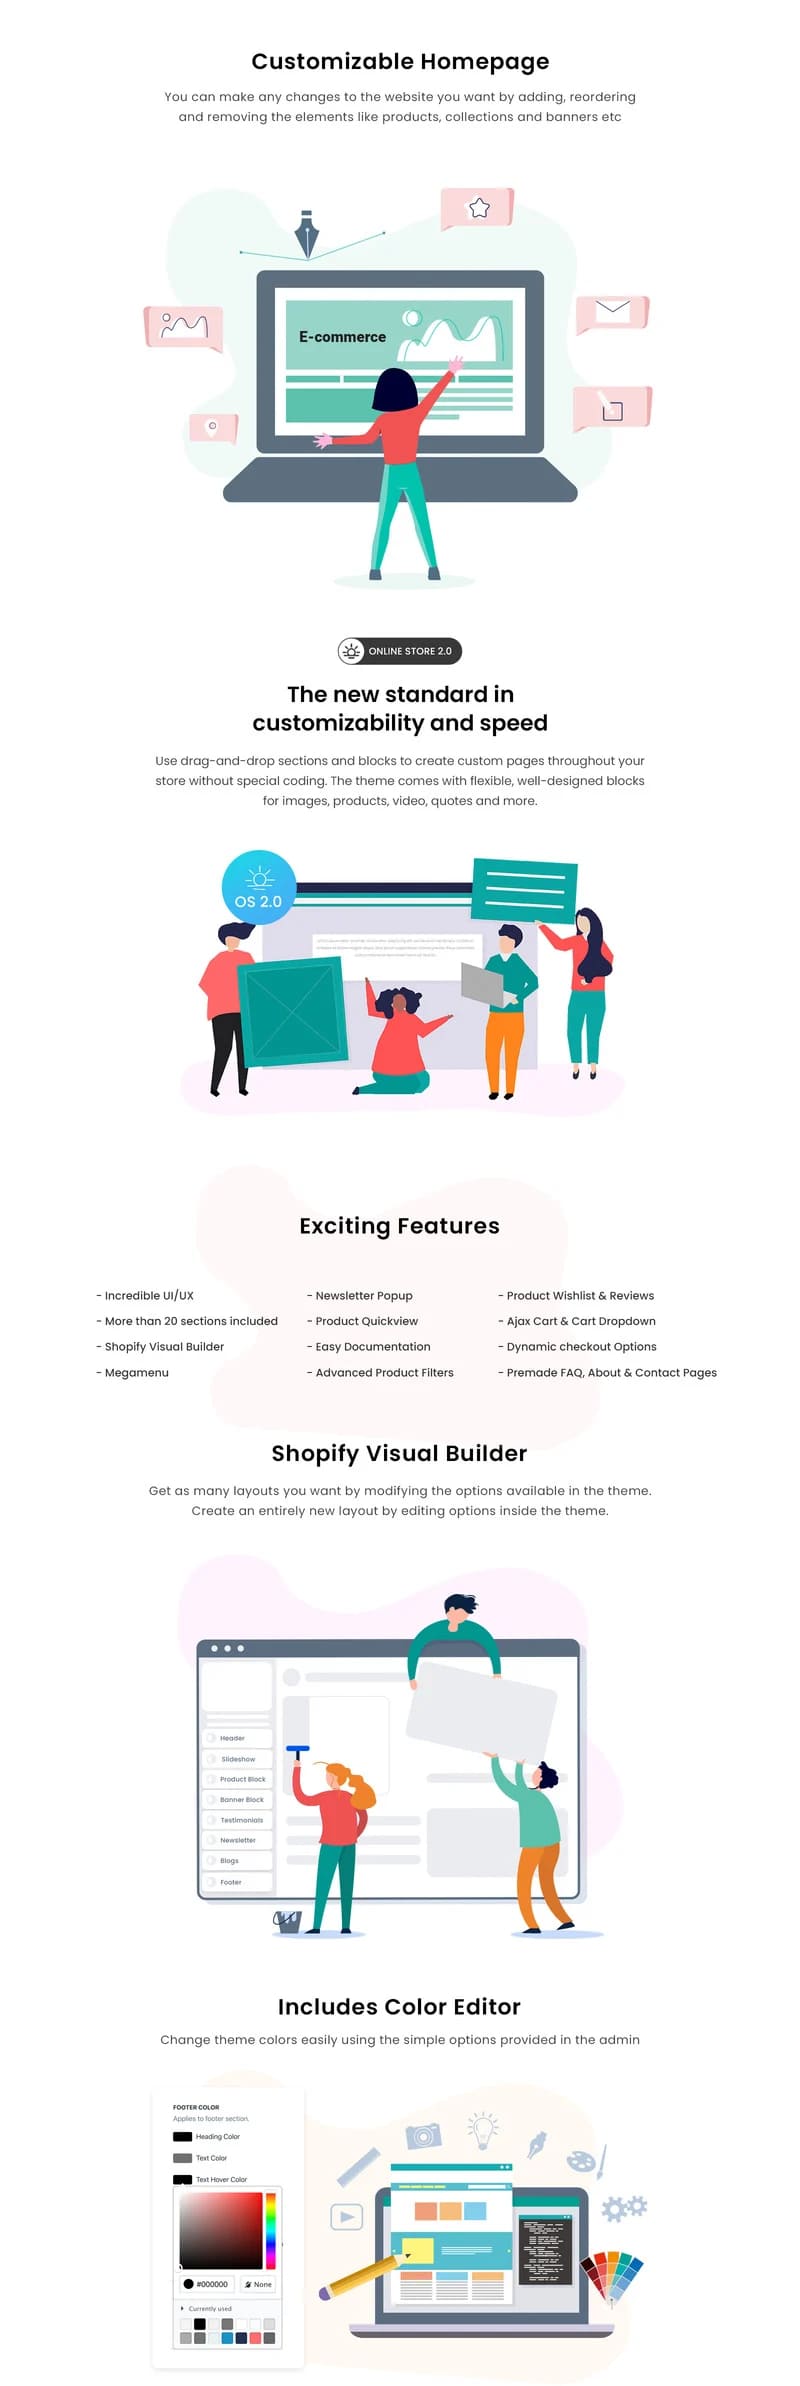 Rose jewellery shopify theme, Exciting Features.